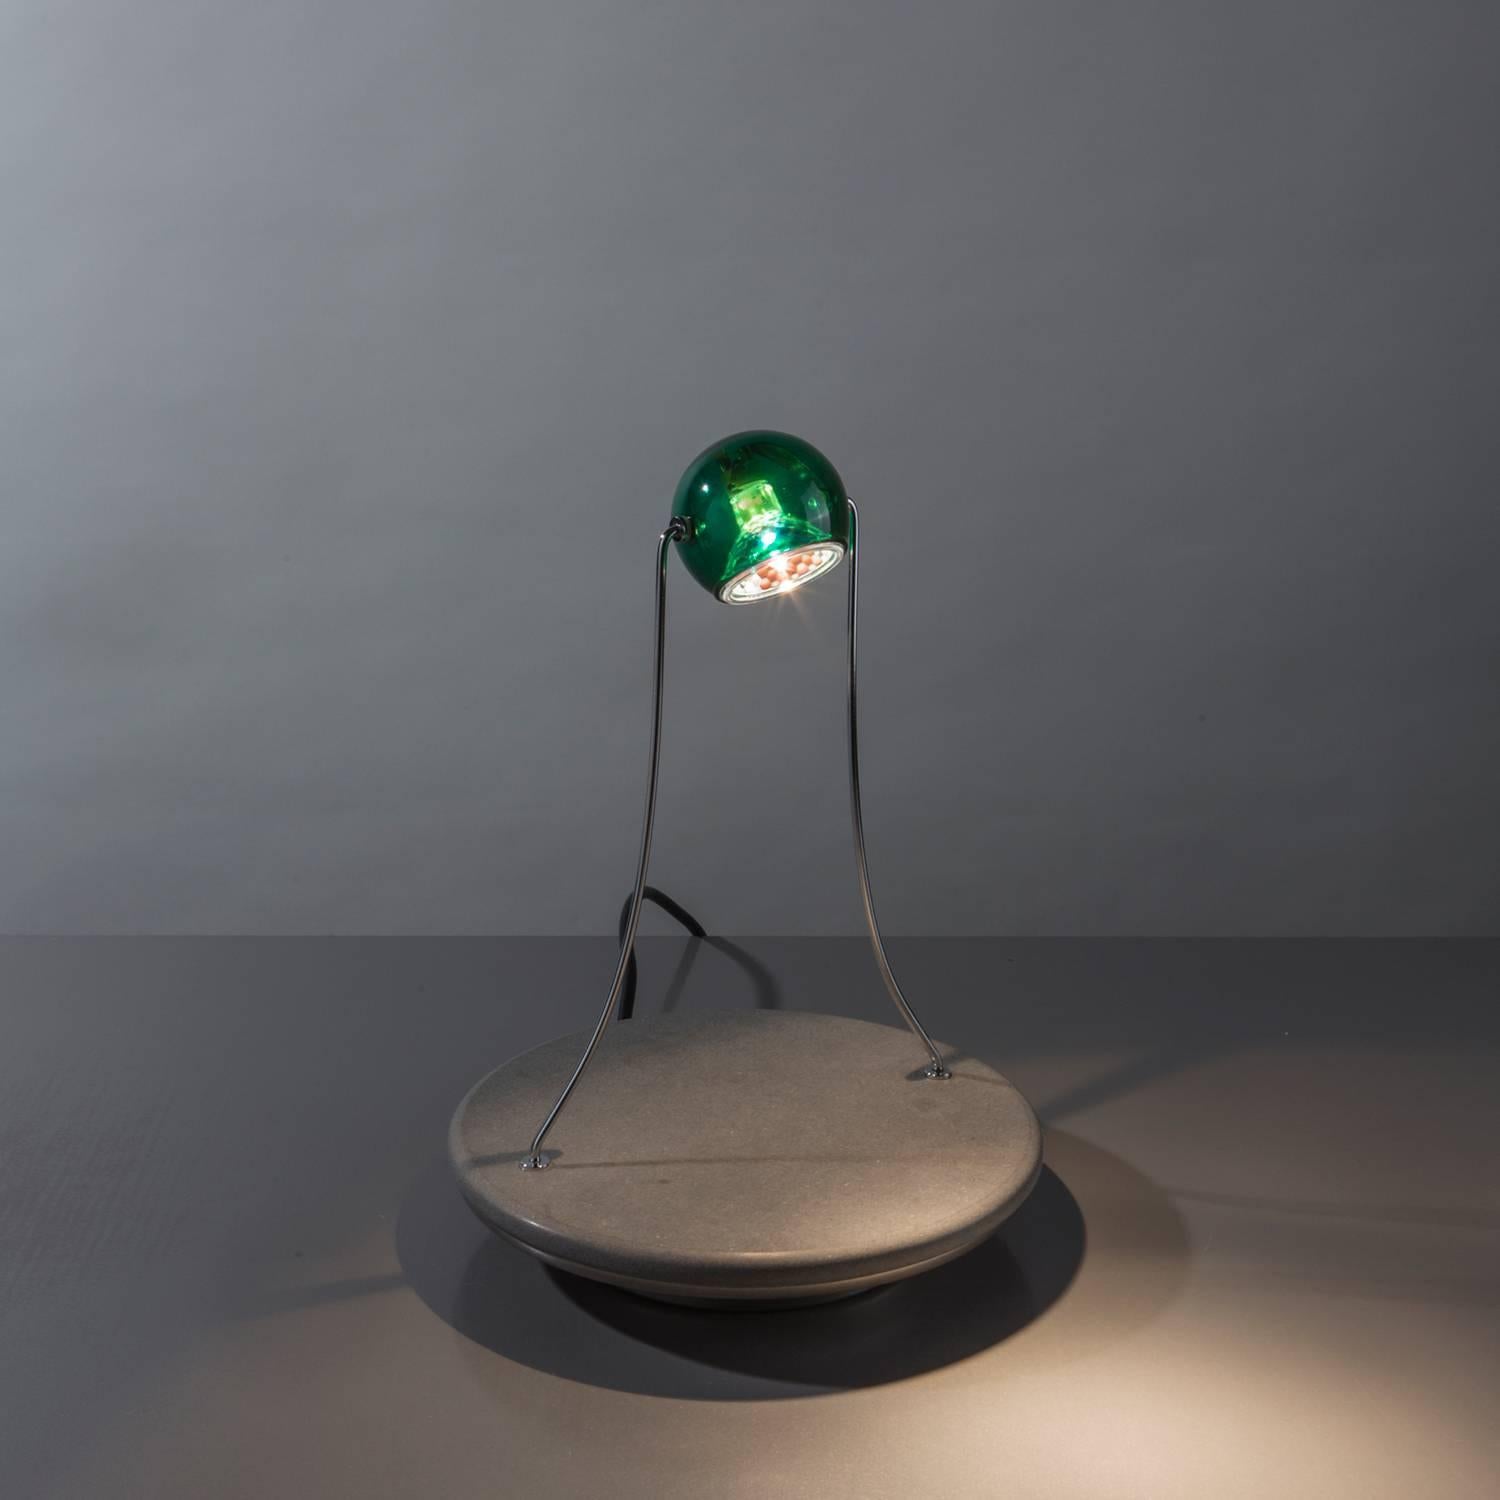 Heavy round Pietra Serena stone base and a green transparent revolving glass lighting head supported by thin chrome arms.